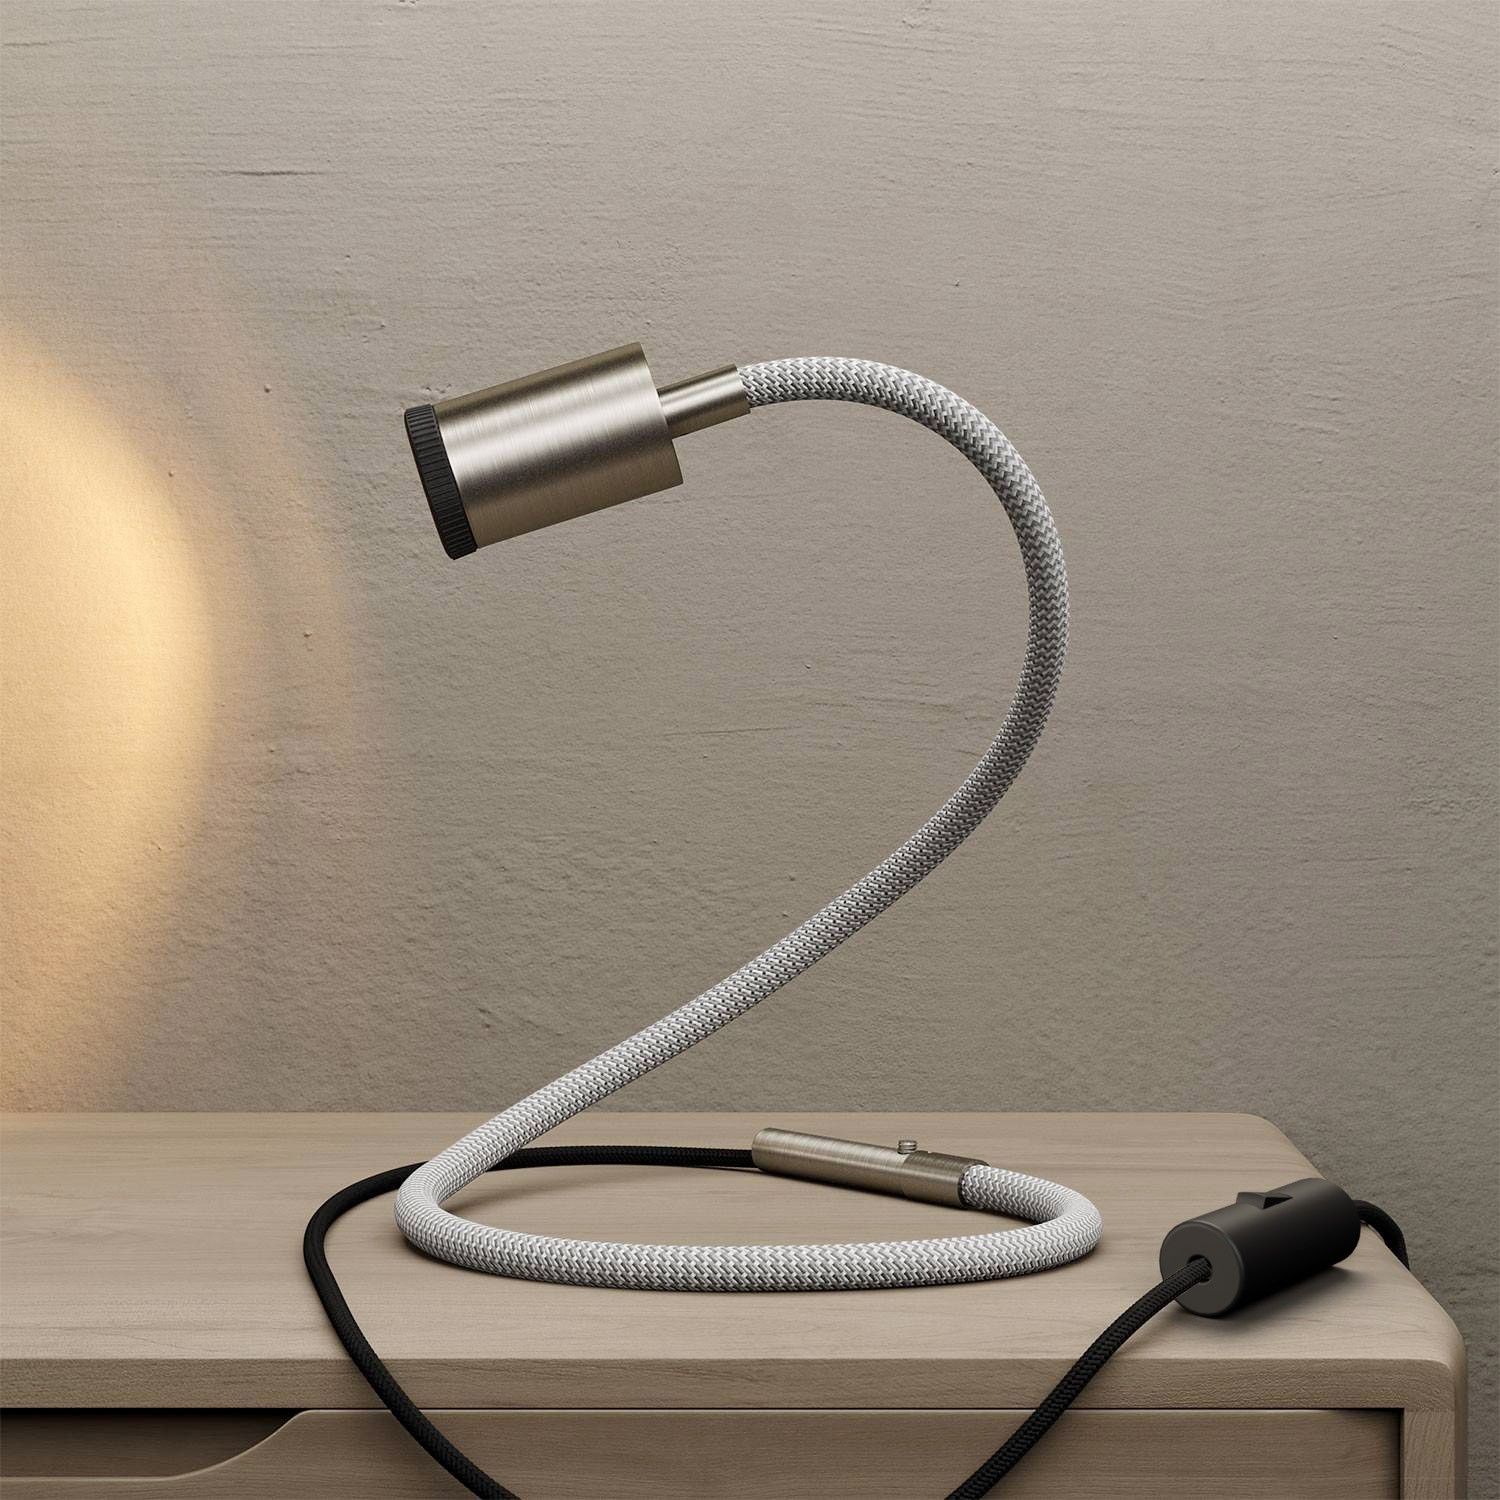 GU1d-one flexible lamp without base with mini LED spotlight and 2-pin plug